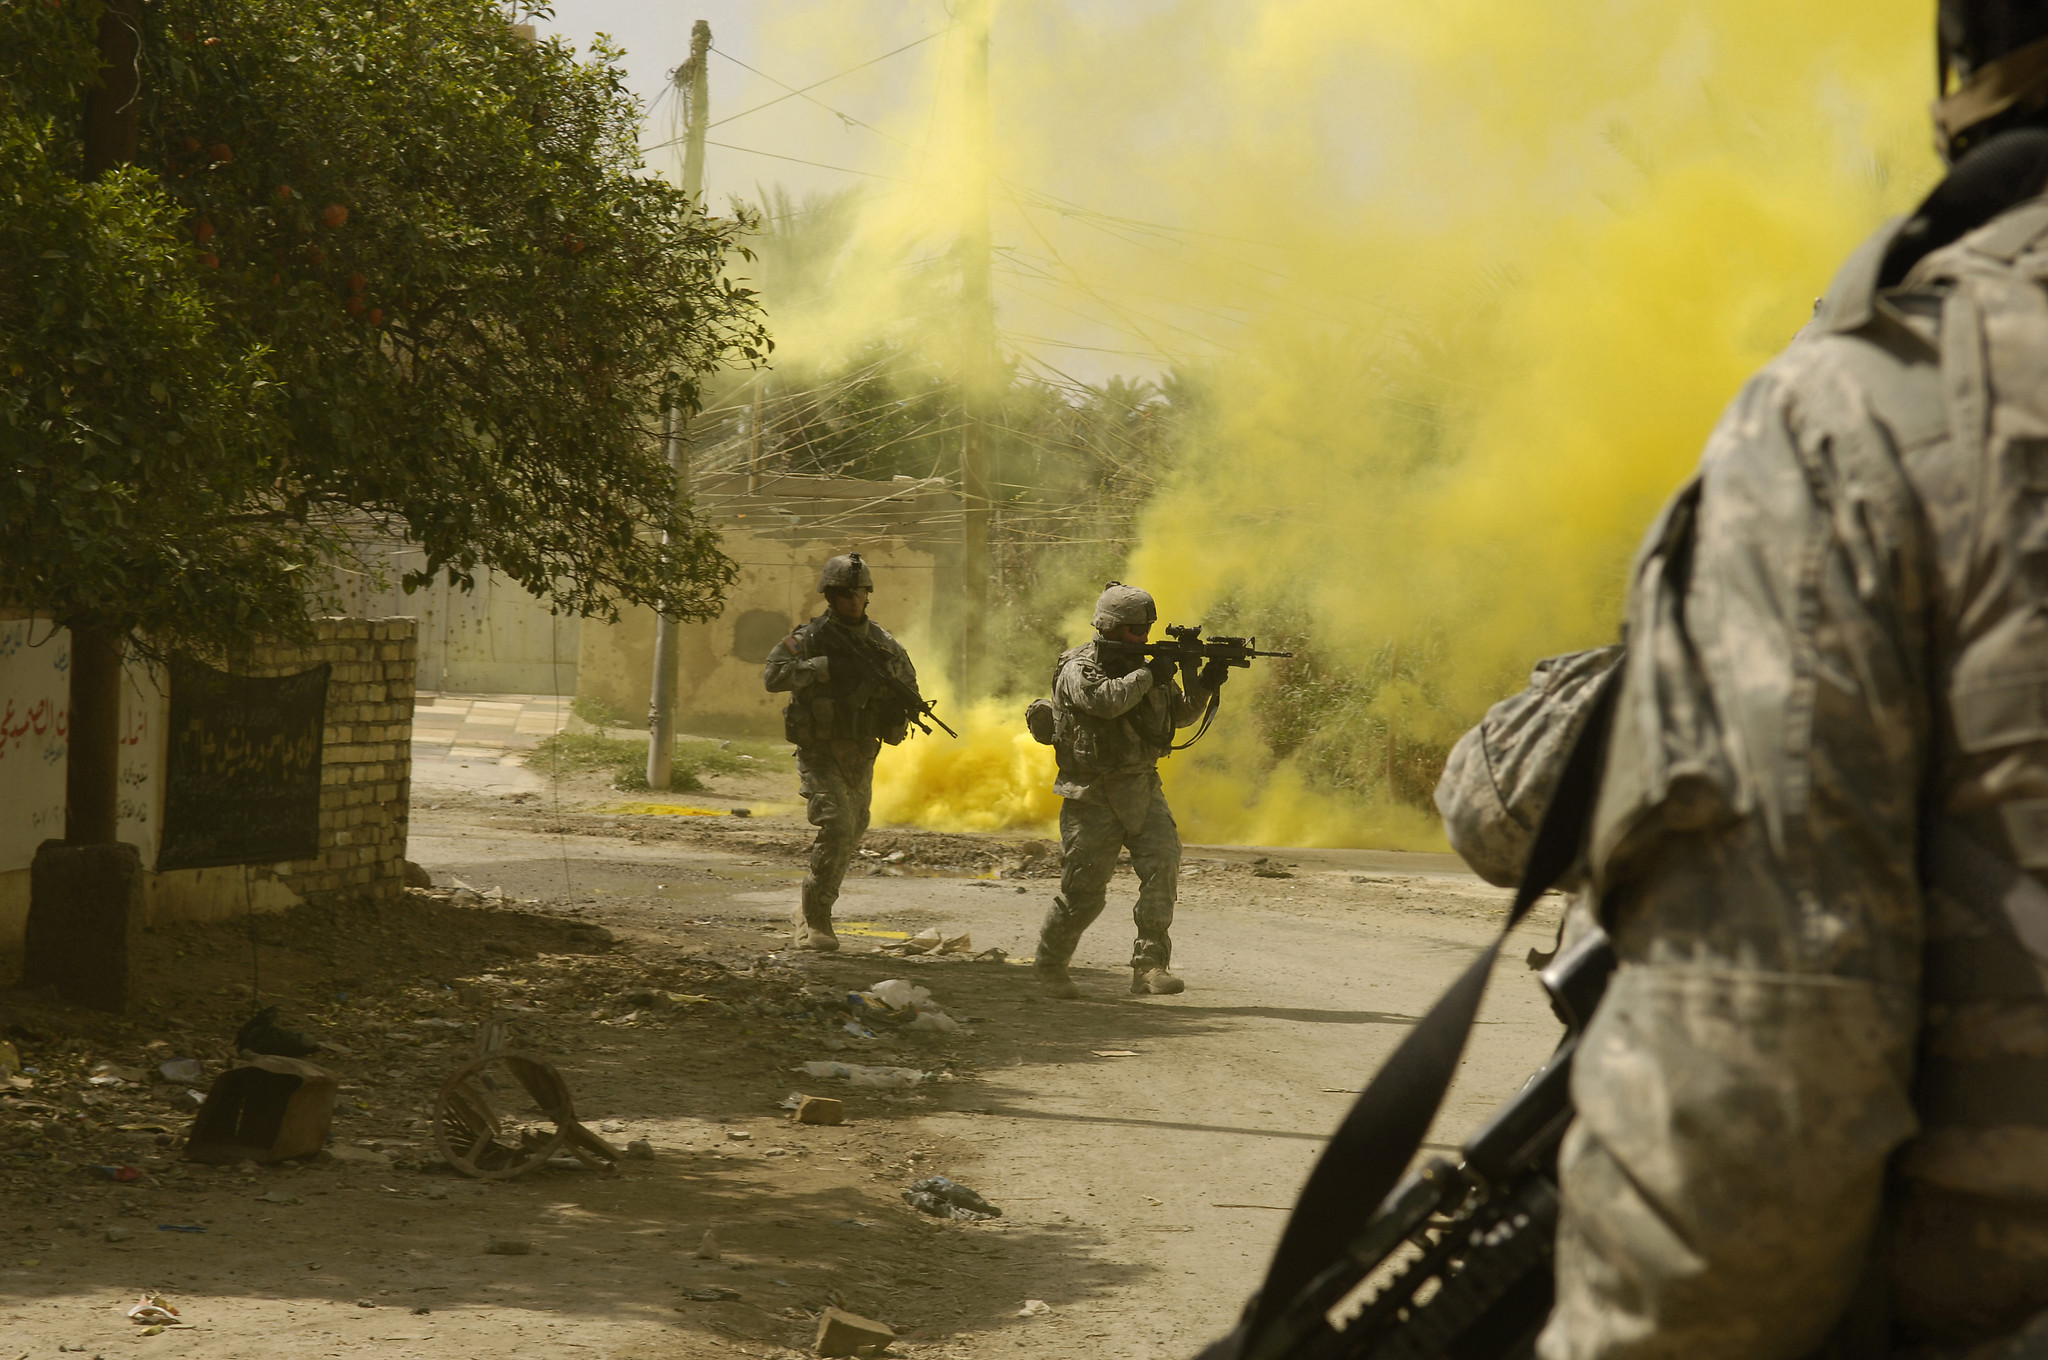 U.S. Army Soldiers from the 1st Stryker Brigade Combat Team use smoke to cover their movements while engaging anti-Iraqi forces in Buhriz, Iraq, March 14, 2007. (U.S. Air Force photo by Staff Sgt. Stacy L. Pearsall) (Released)